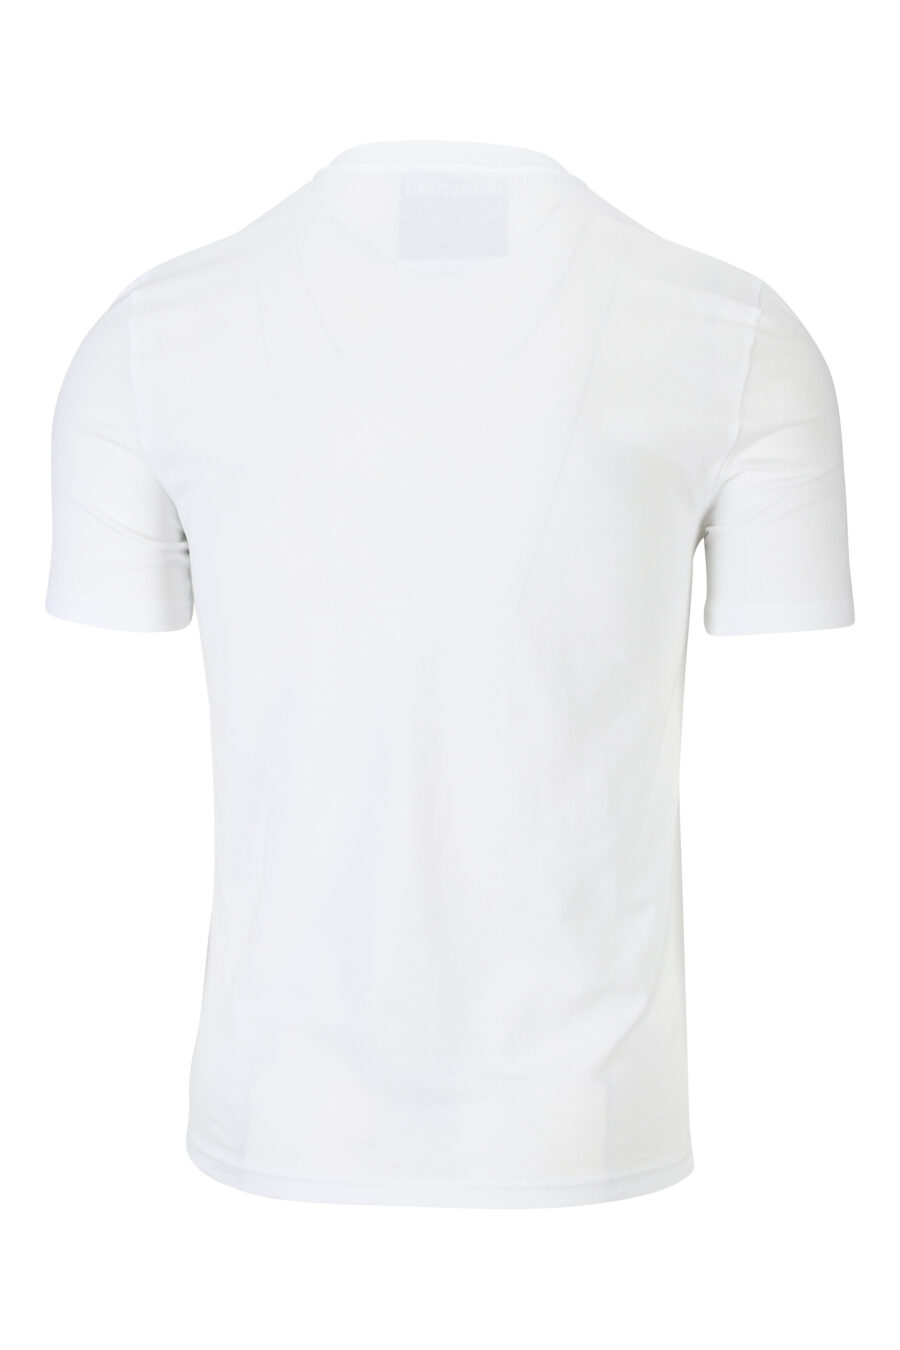 White T-shirt with black worn minilogue - 889316938791 1